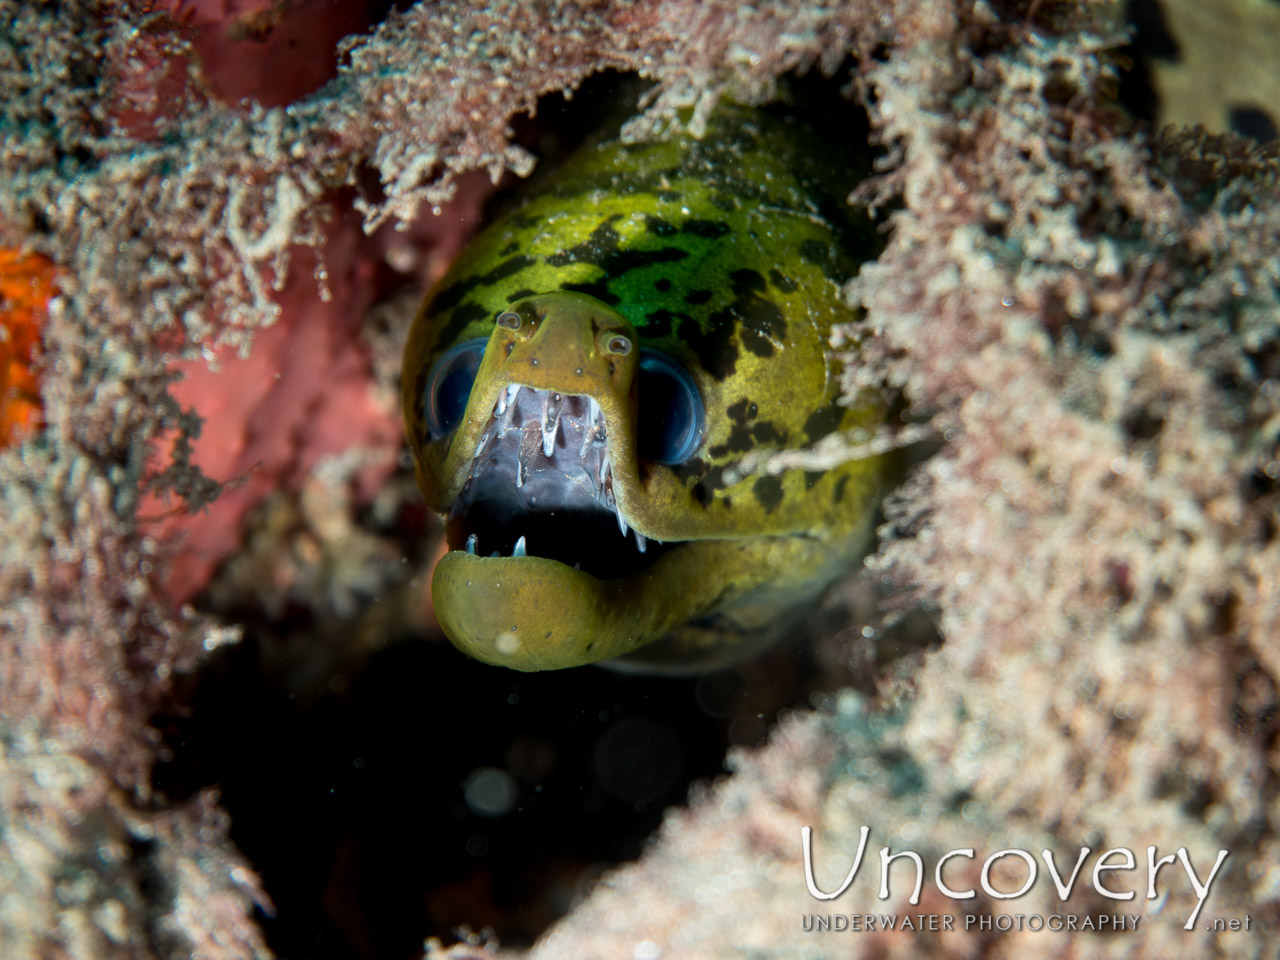 Fimbriated Moray (gymnothorax Fimbriatus), photo taken in Indonesia, North Sulawesi, Lembeh Strait, Aer Bajo 1